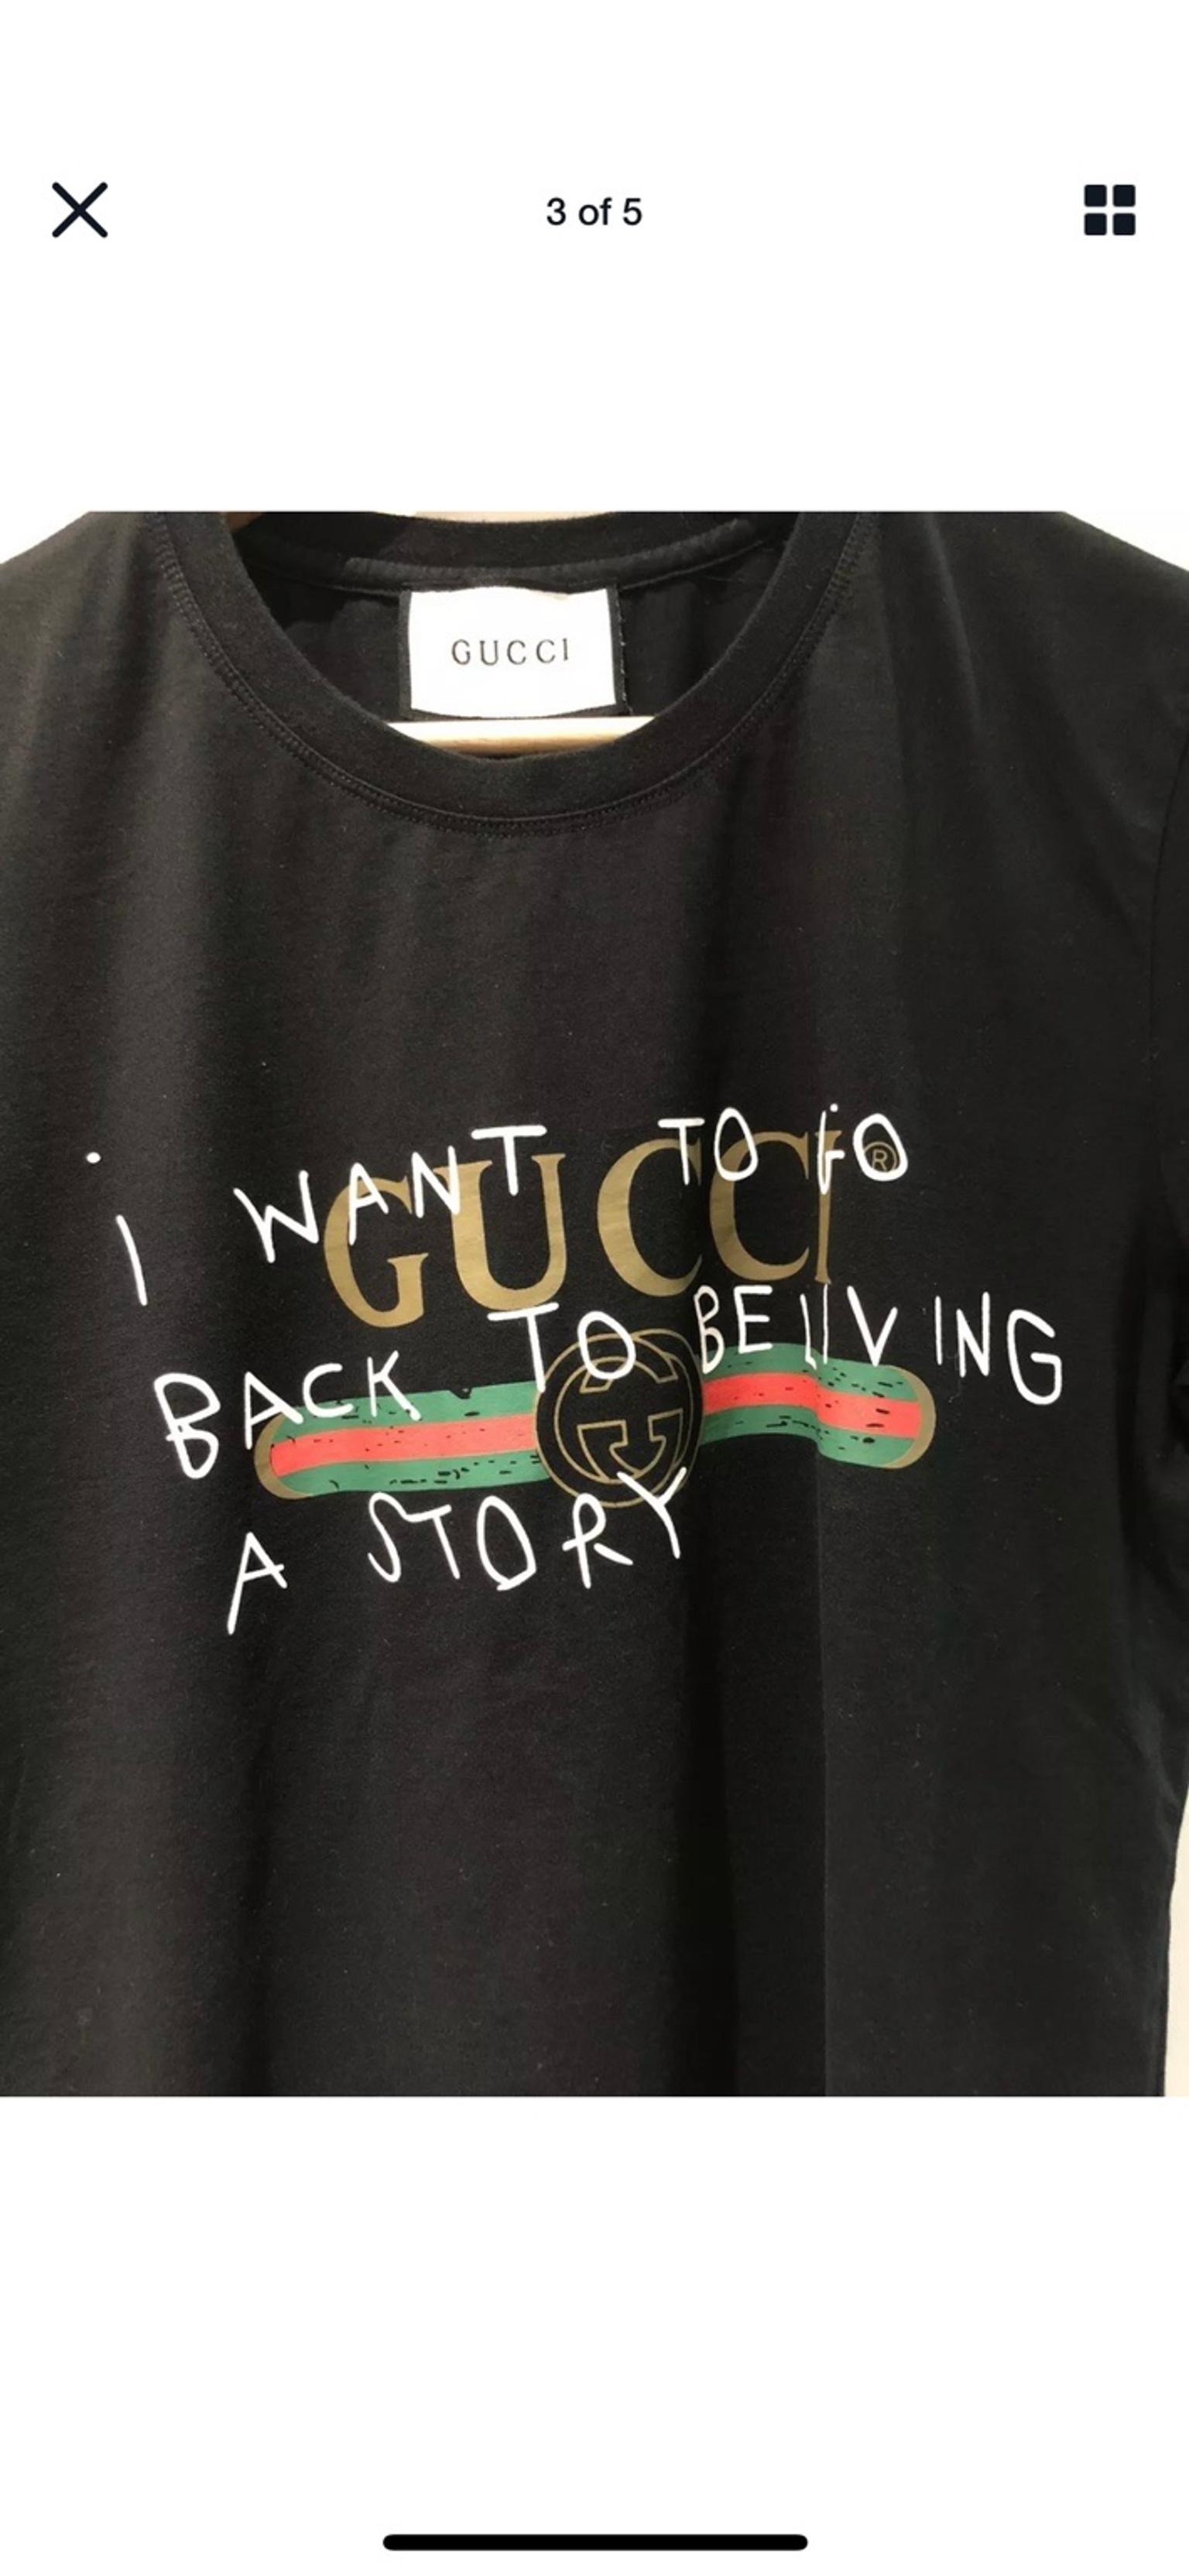 gucci t shirt i want to go back